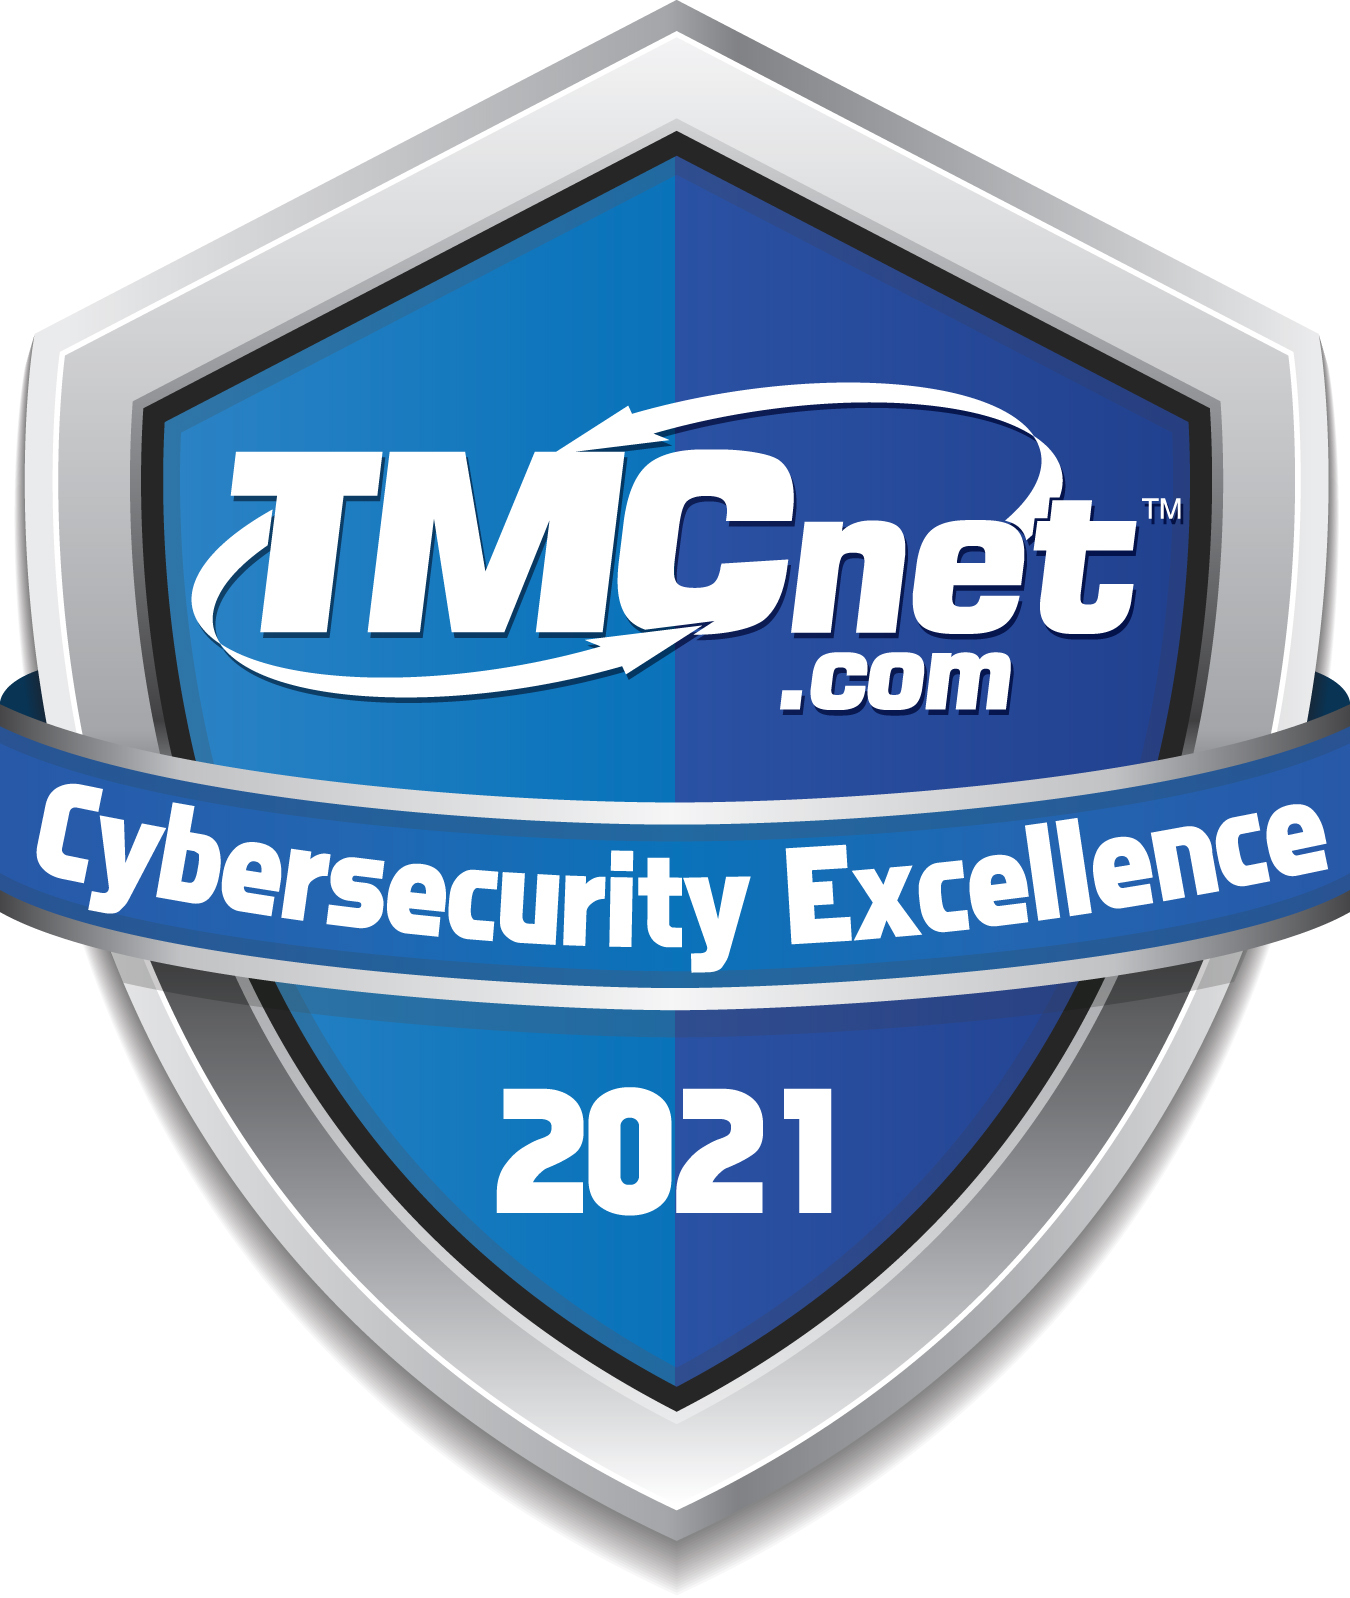 cybersecurity excellence 2021